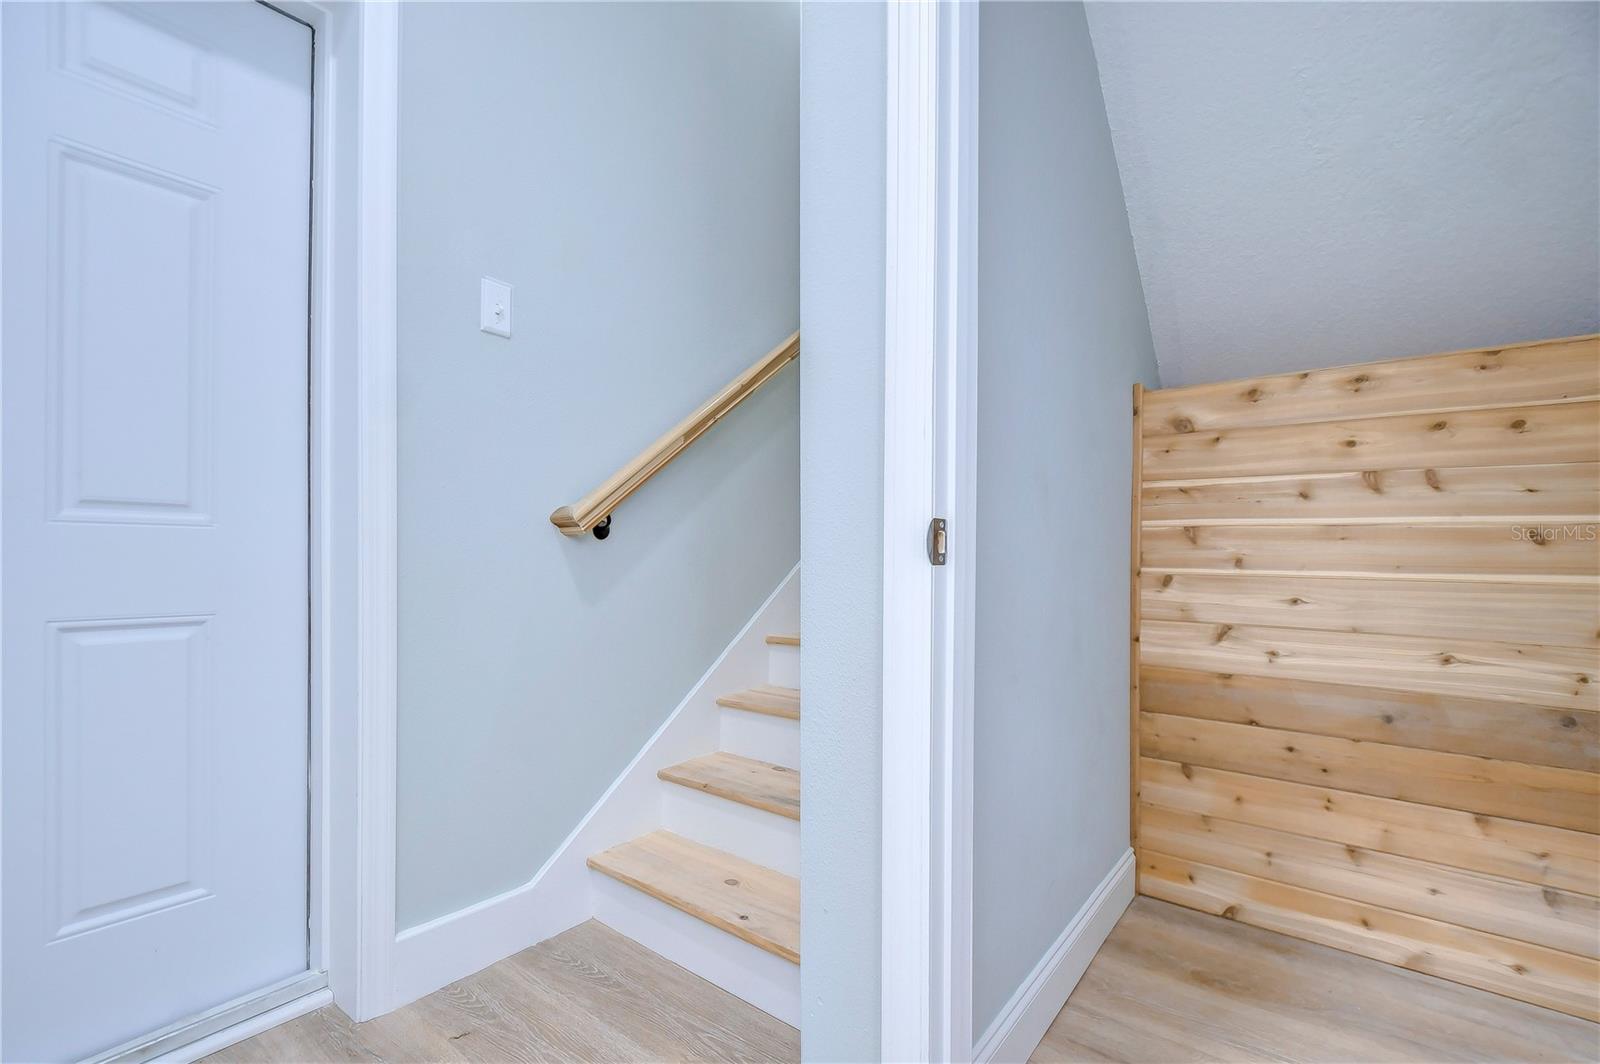 A cedar lined closet is the perfect storage space and is just off the garage.